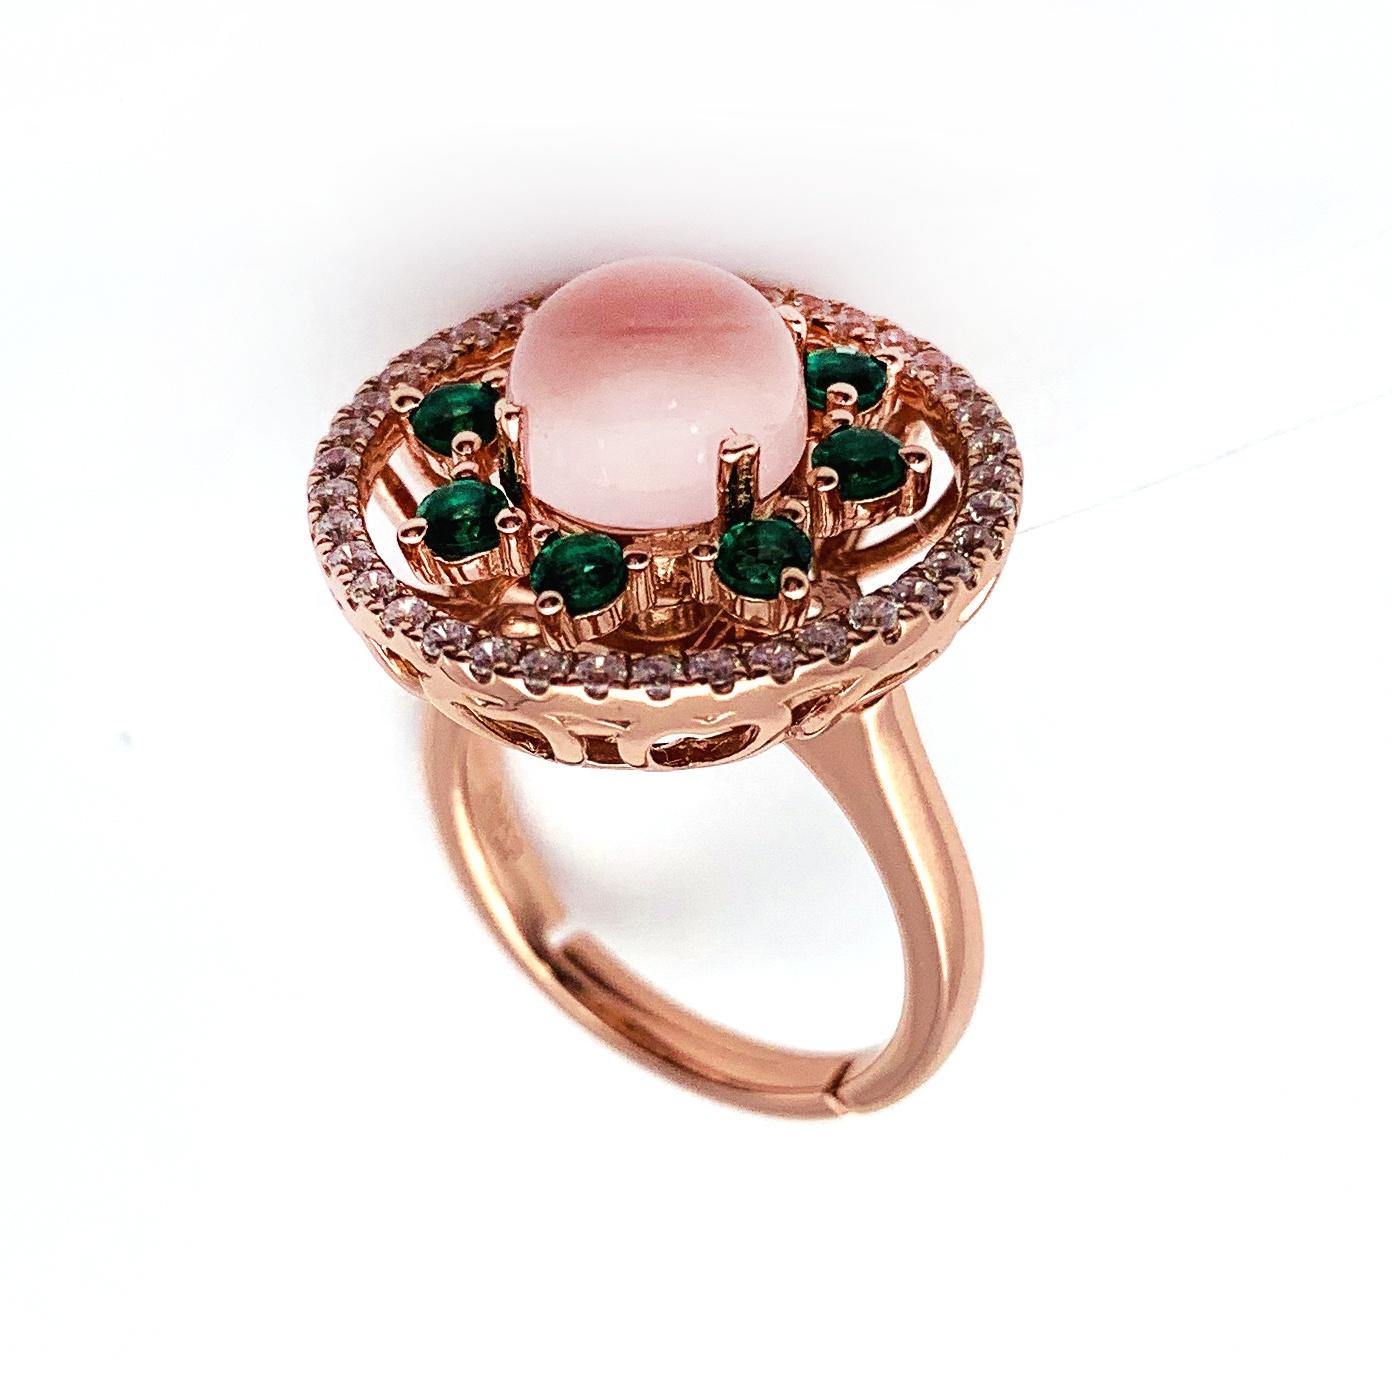 Green Stone New Dual Design Flower Onyx Silver 22 Carat Gold Ring